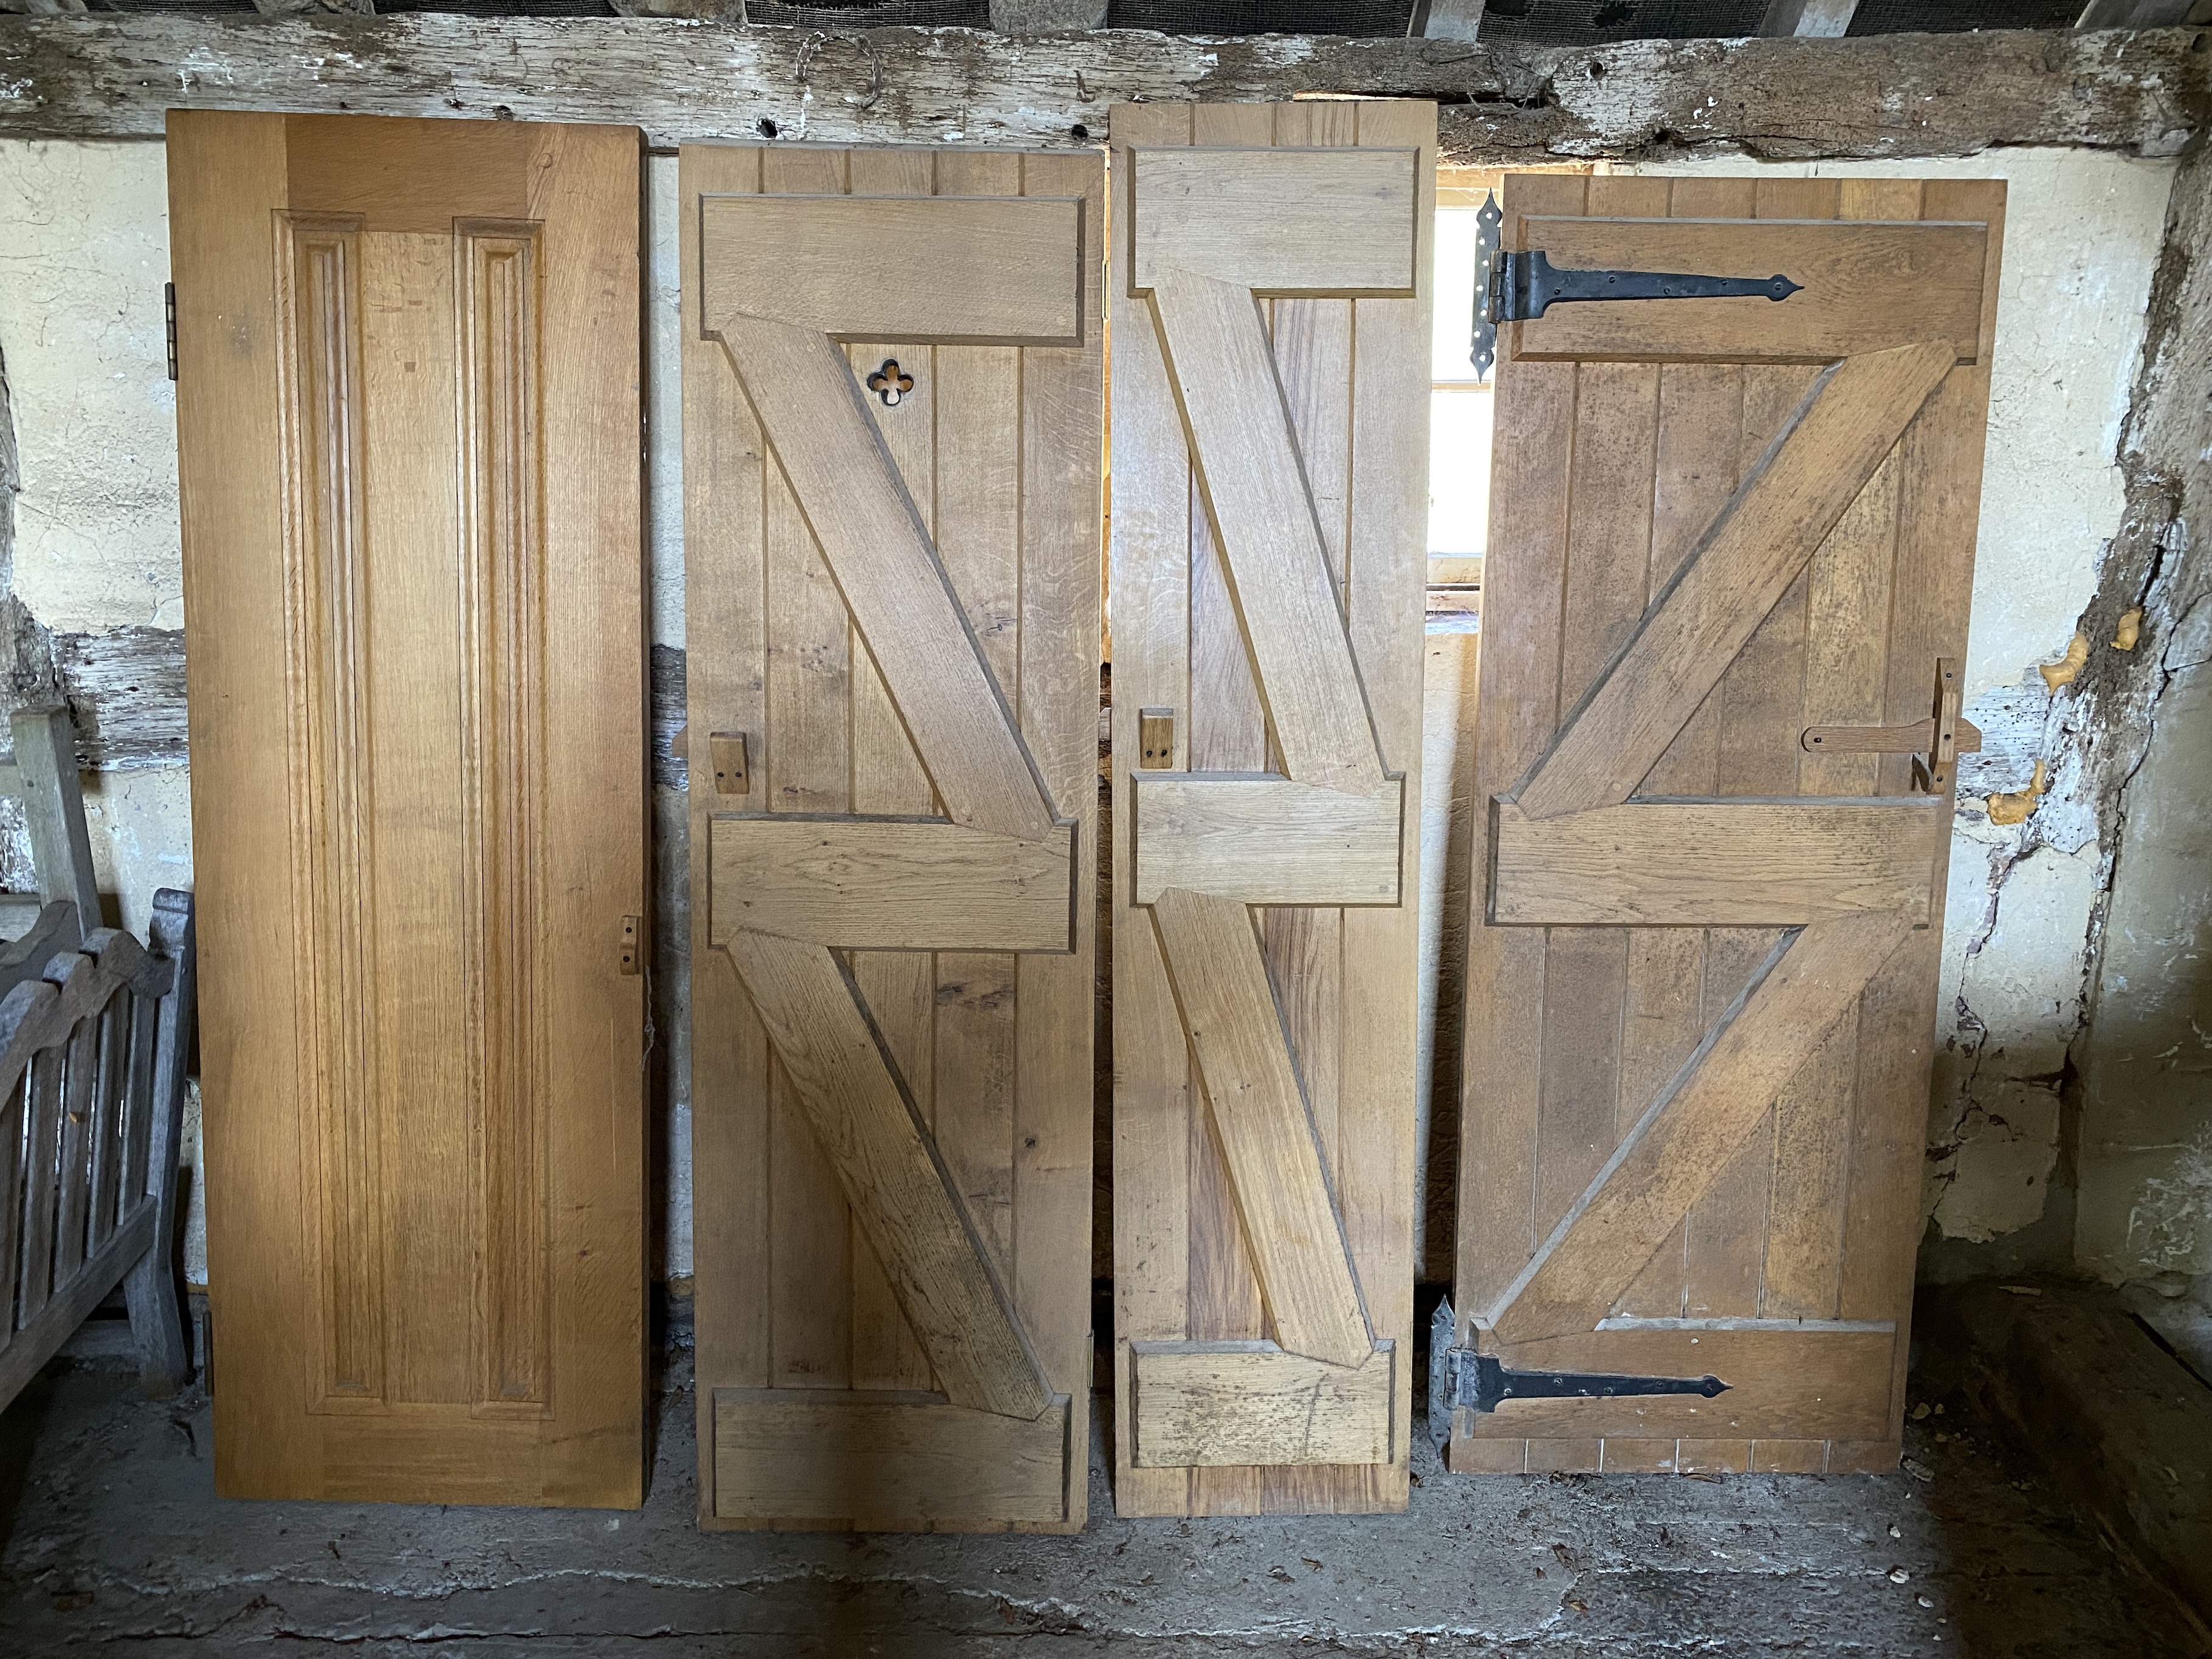 Three solid oak ledged and braced doors, 210 x 58.5cm; 204 x 44.5cm and 95 x 72cm, and a double sided panelled solid oak door, 200 x 64cm (4)